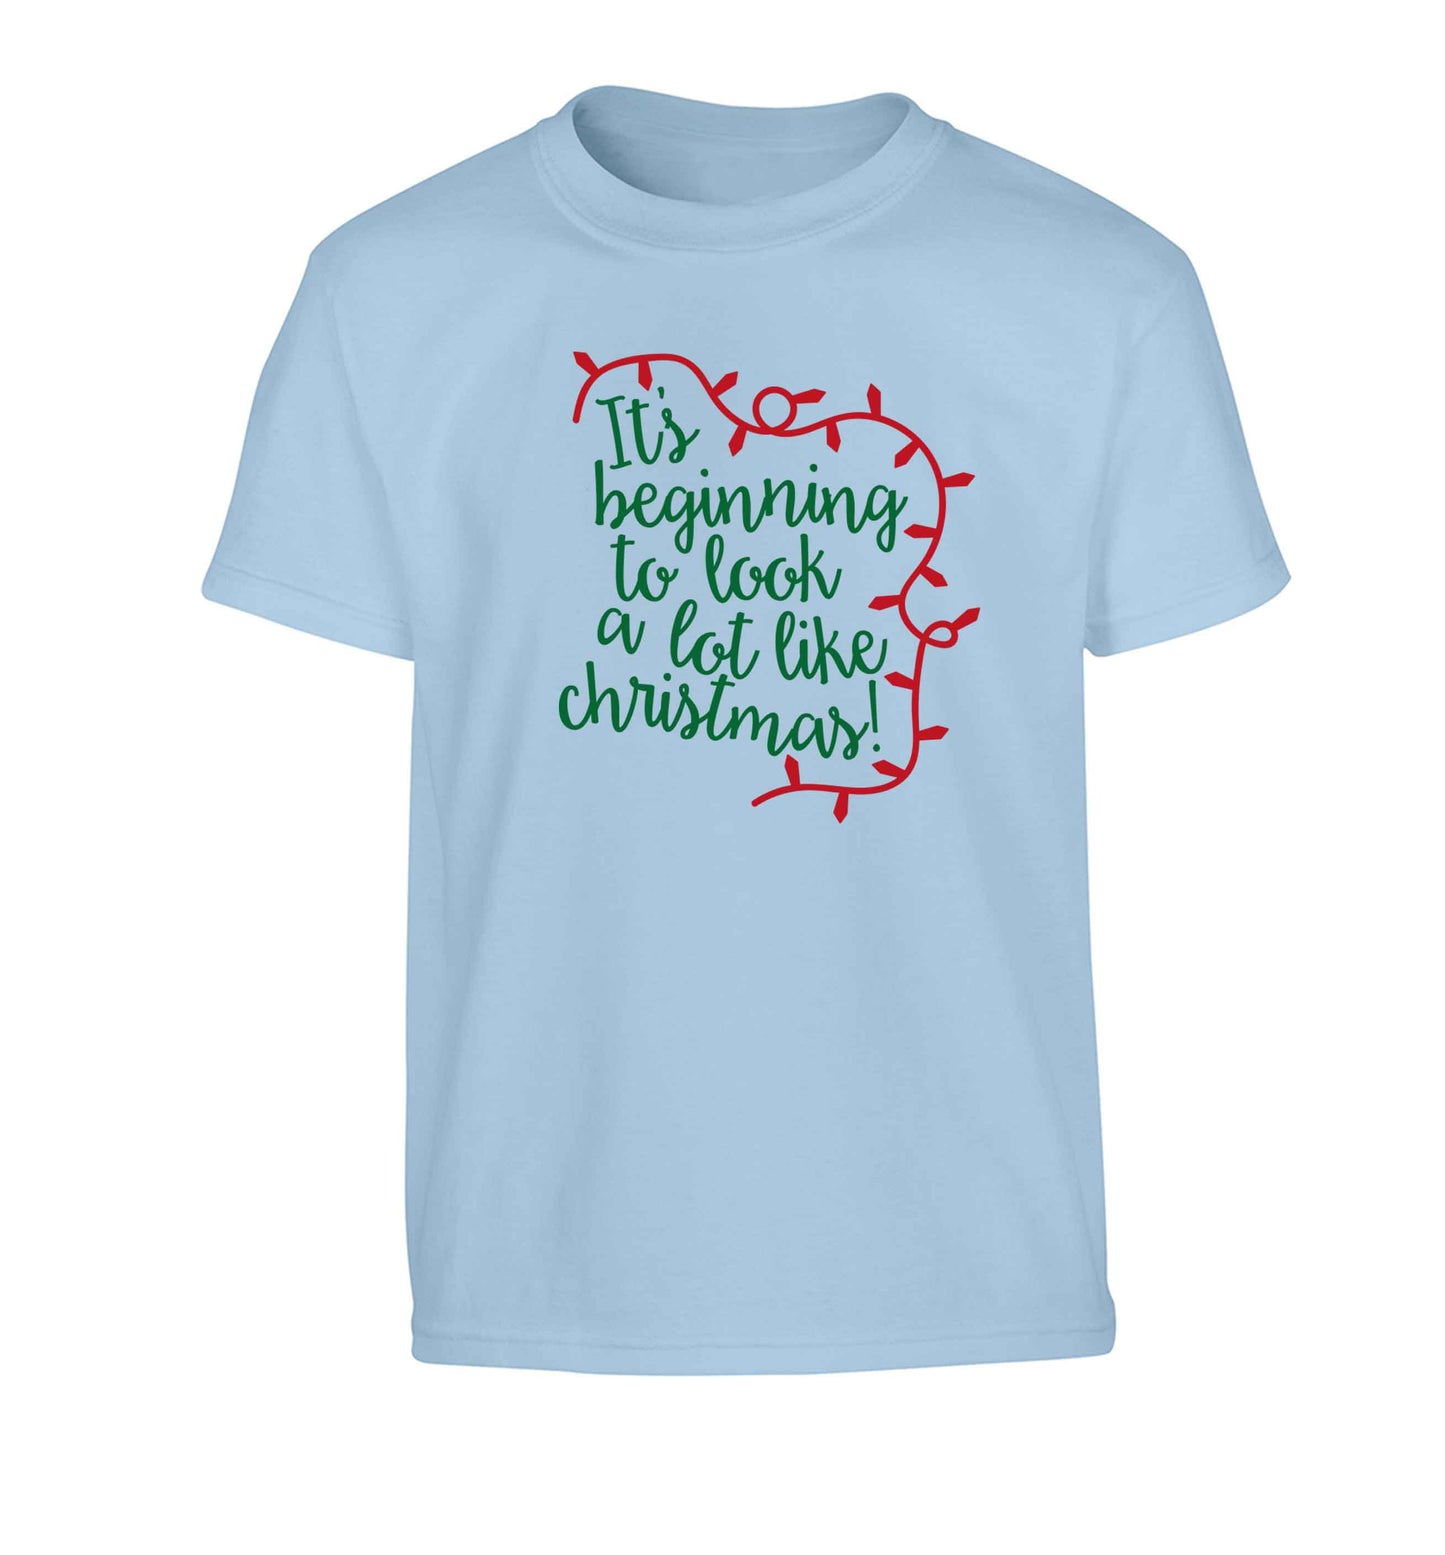 It's beginning to look a lot like Christmas Children's light blue Tshirt 12-13 Years